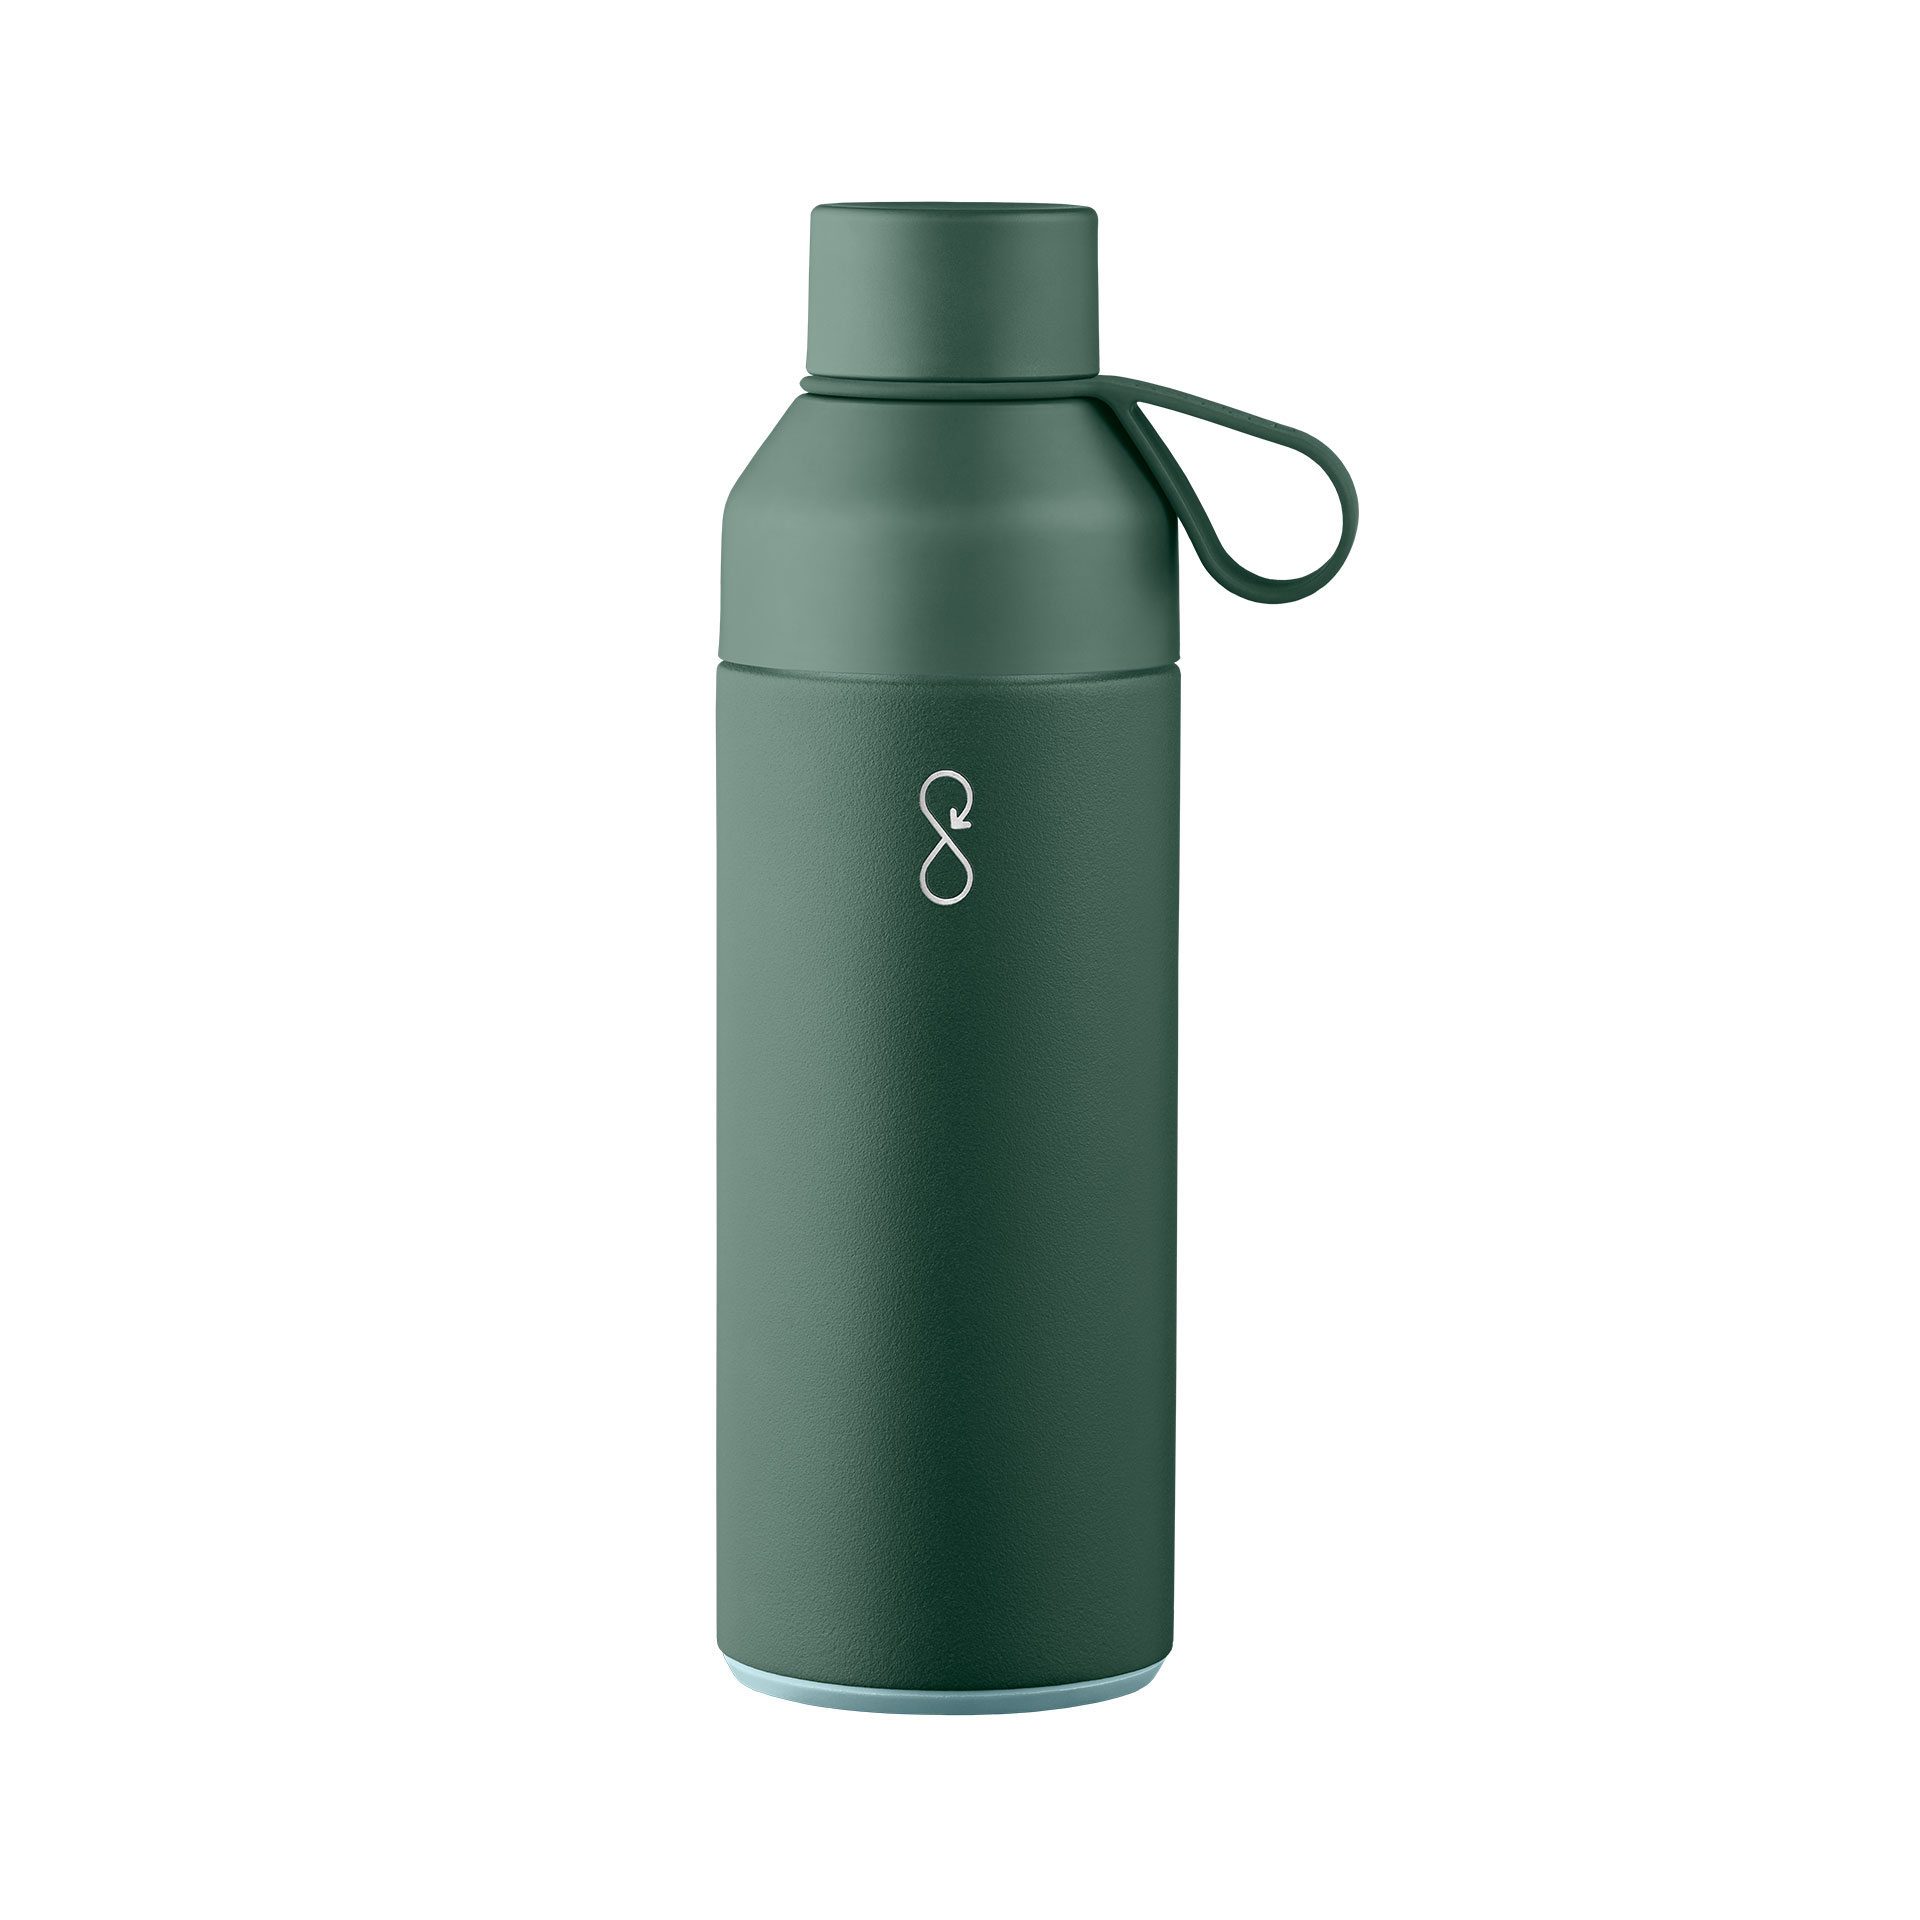 The Ocean Bottle is made from part recycled plastic and stainless steel. Each bottle funds the collection of 11.4kg of plastic, equivalent to 1000 plastic bottles. Plastic Bank ensures that the plastic waste is collected by locals living in coastal communities, mostly in Asia. This bottle is vacuum thermos insulated, this means it keeps cold drinks cold and hot drinks hot. It comes with an easy carry silicone loop, double opening for easy drink and a clean drinking cup. Dishwasher safe. 500ml capacity. Green